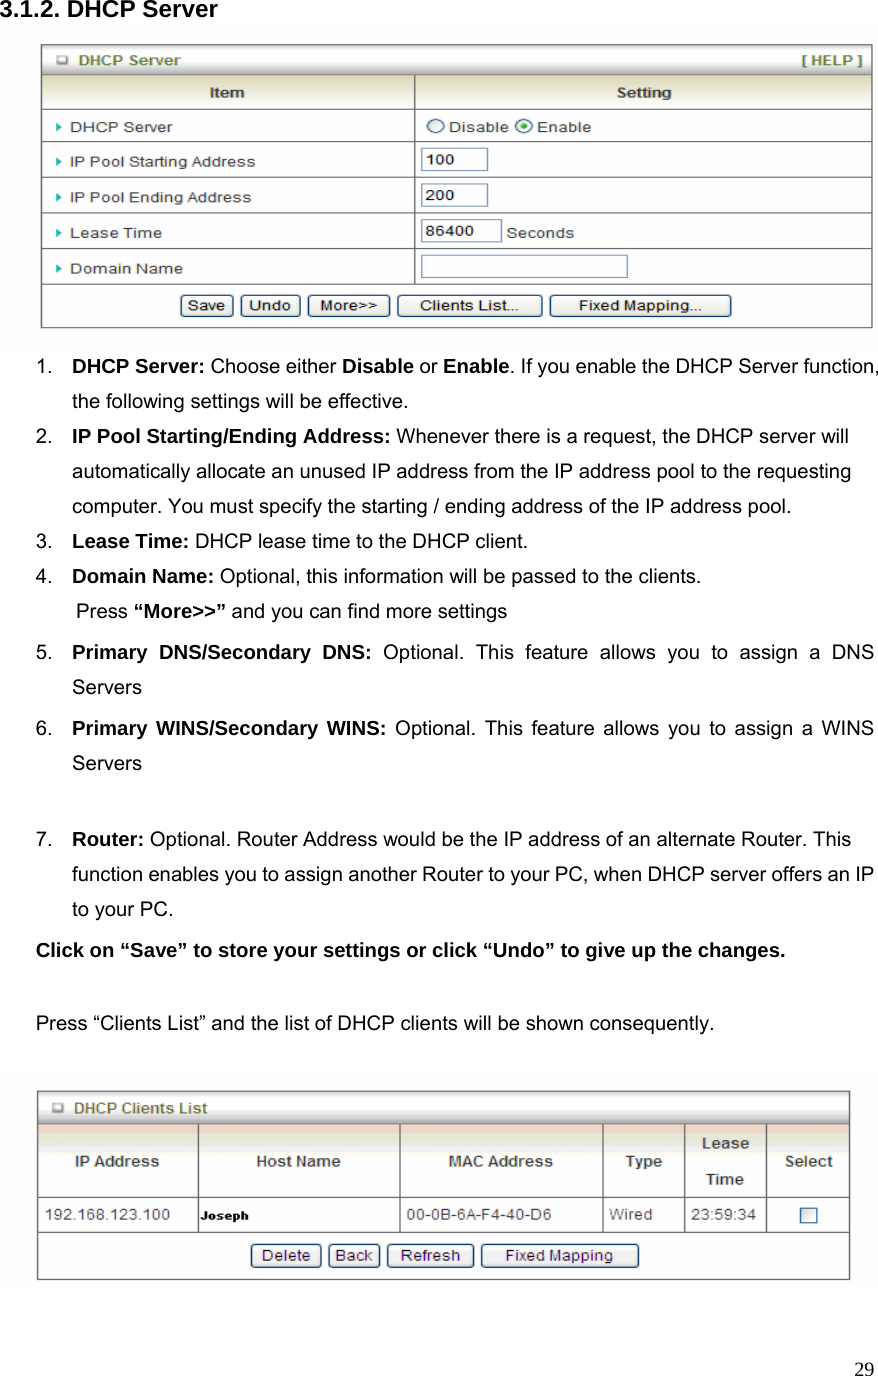  293.1.2. DHCP Server  1.  DHCP Server: Choose either Disable or Enable. If you enable the DHCP Server function, the following settings will be effective. 2.  IP Pool Starting/Ending Address: Whenever there is a request, the DHCP server will automatically allocate an unused IP address from the IP address pool to the requesting computer. You must specify the starting / ending address of the IP address pool. 3.  Lease Time: DHCP lease time to the DHCP client. 4.  Domain Name: Optional, this information will be passed to the clients. Press “More&gt;&gt;” and you can find more settings 5.  Primary DNS/Secondary DNS: Optional. This feature allows you to assign a DNS Servers 6.  Primary WINS/Secondary WINS: Optional. This feature allows you to assign a WINS Servers  7.  Router: Optional. Router Address would be the IP address of an alternate Router. This function enables you to assign another Router to your PC, when DHCP server offers an IP to your PC. Click on “Save” to store your settings or click “Undo” to give up the changes.  Press “Clients List” and the list of DHCP clients will be shown consequently.            